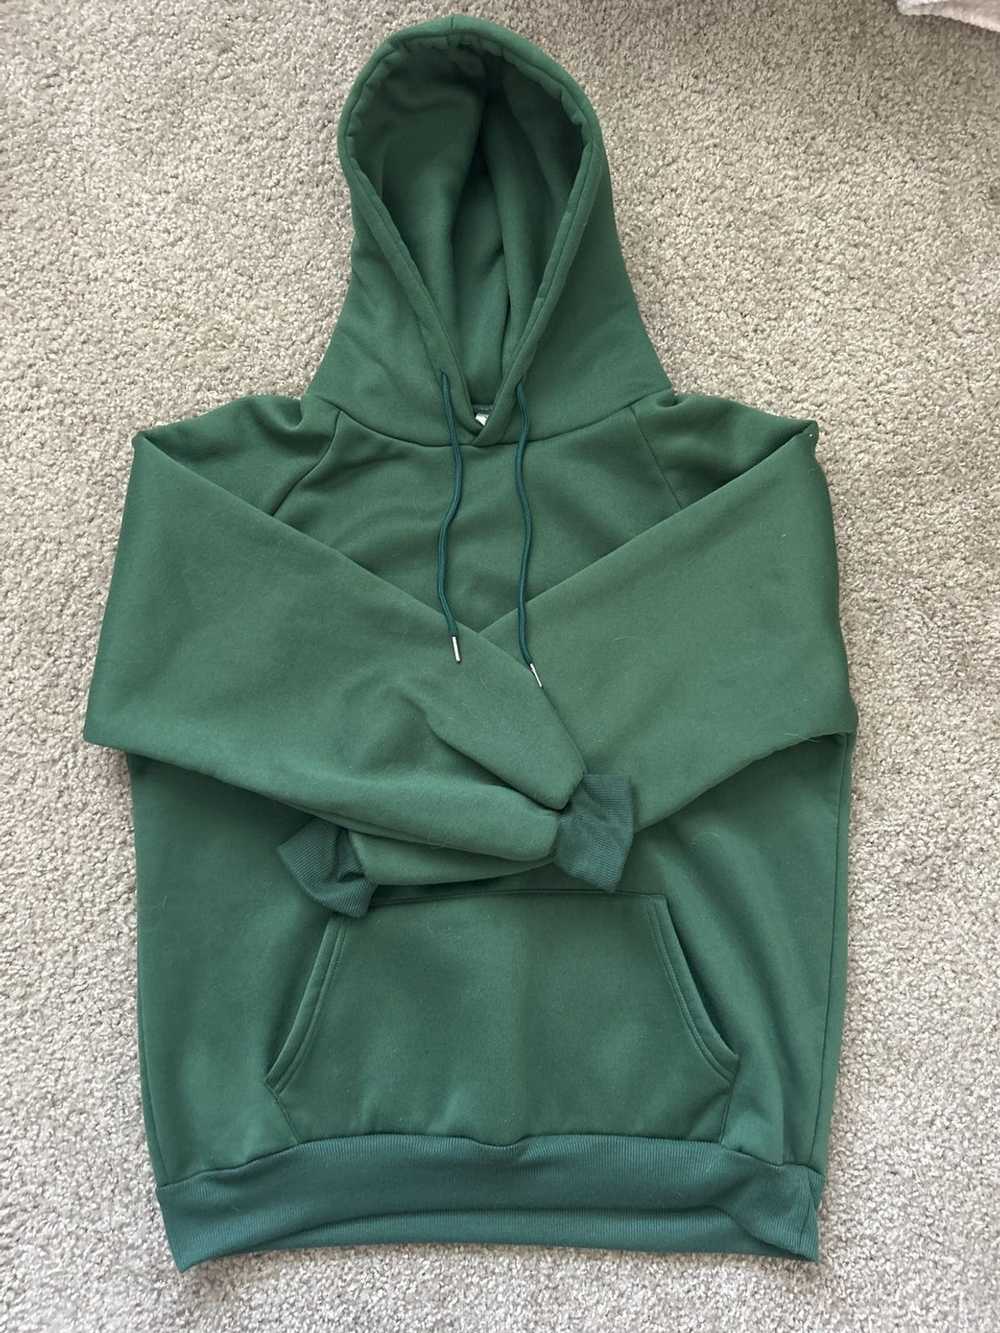 Other Green hoodie XL - image 3